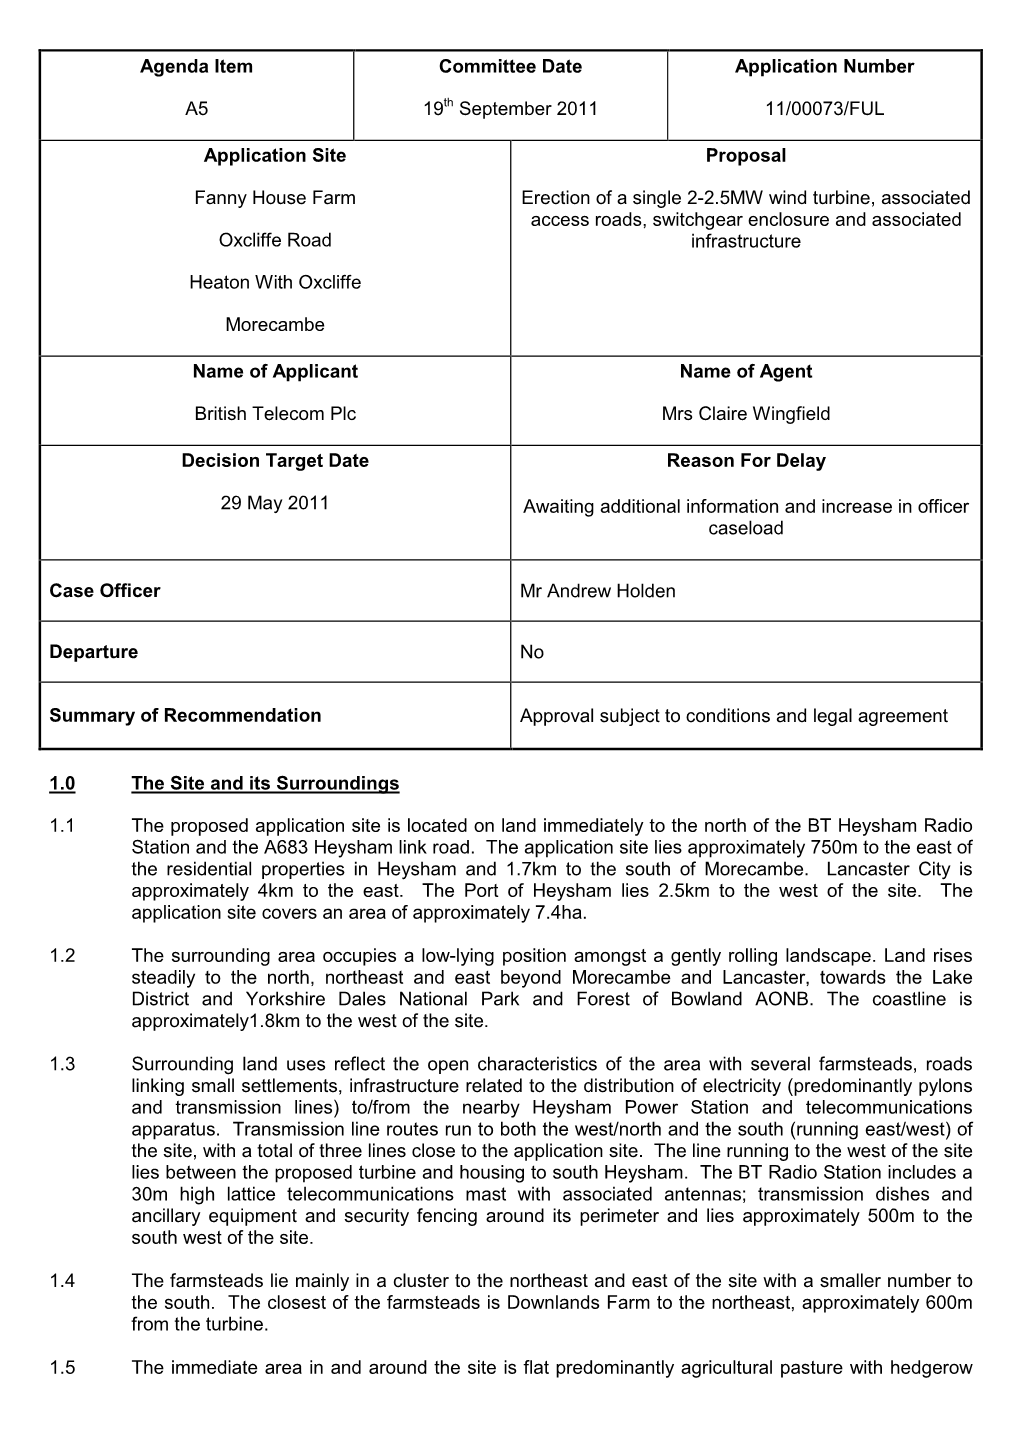 Agenda Item A5 Committee Date 19Th September 2011 Application